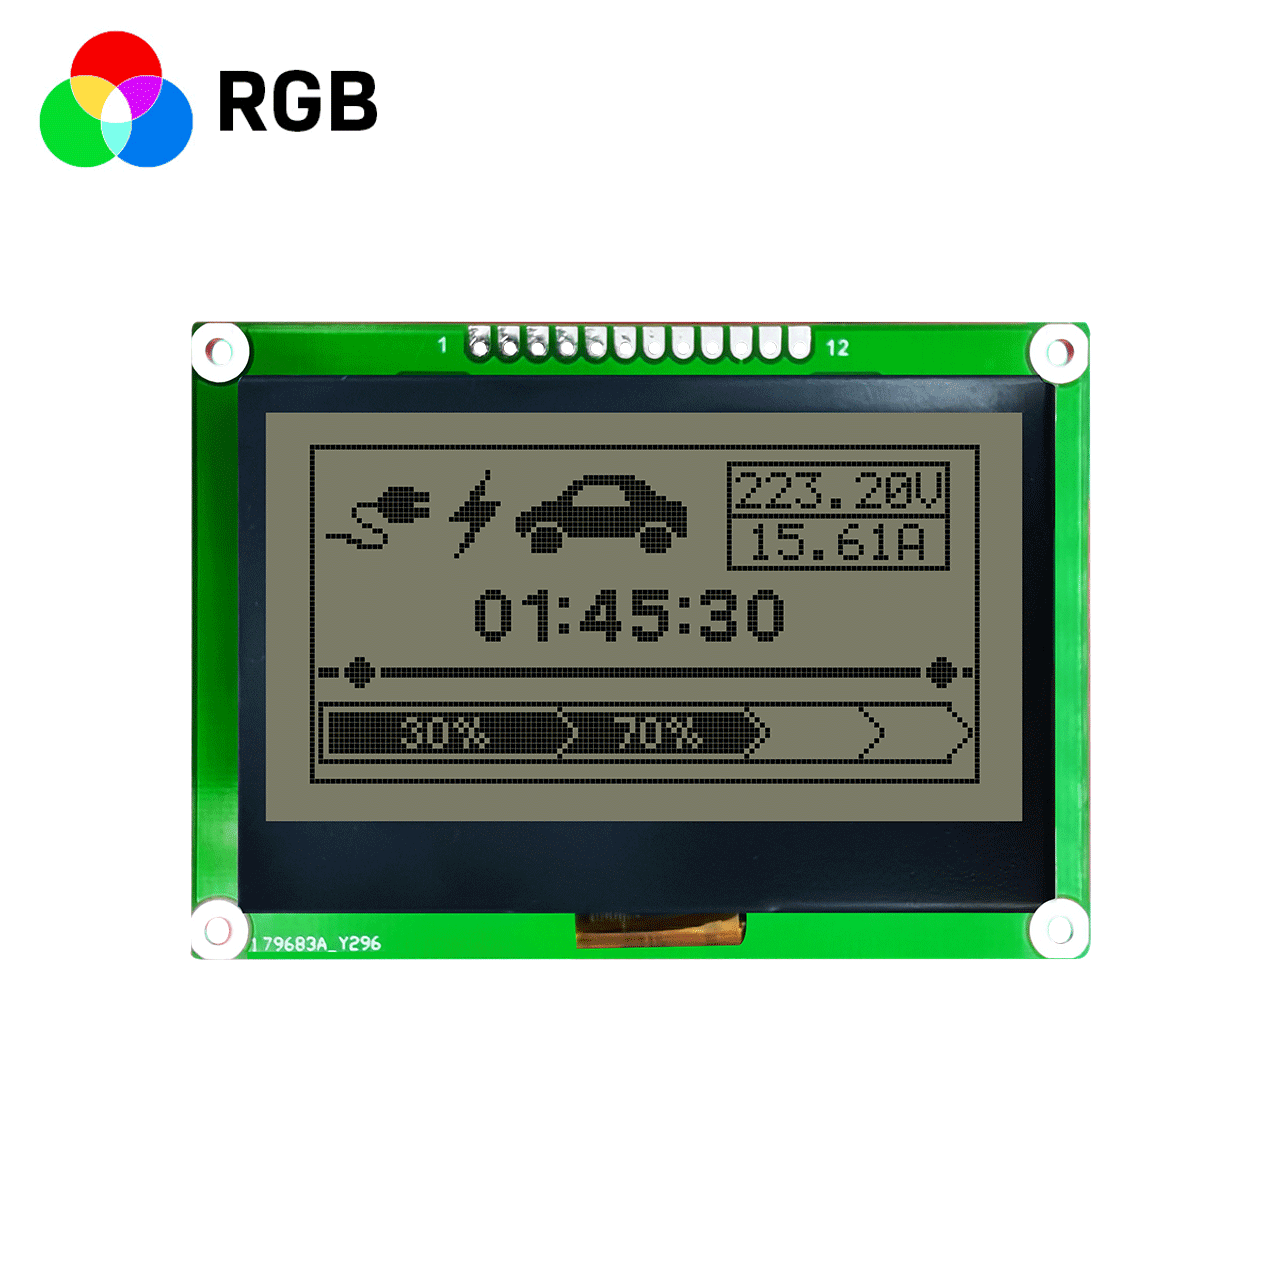 2.7-inch LCM12864 graphic dot matrix display module/128x64 graphic LCD display/FST fully transparent positive polarizer/RGB red, green and blue backlight